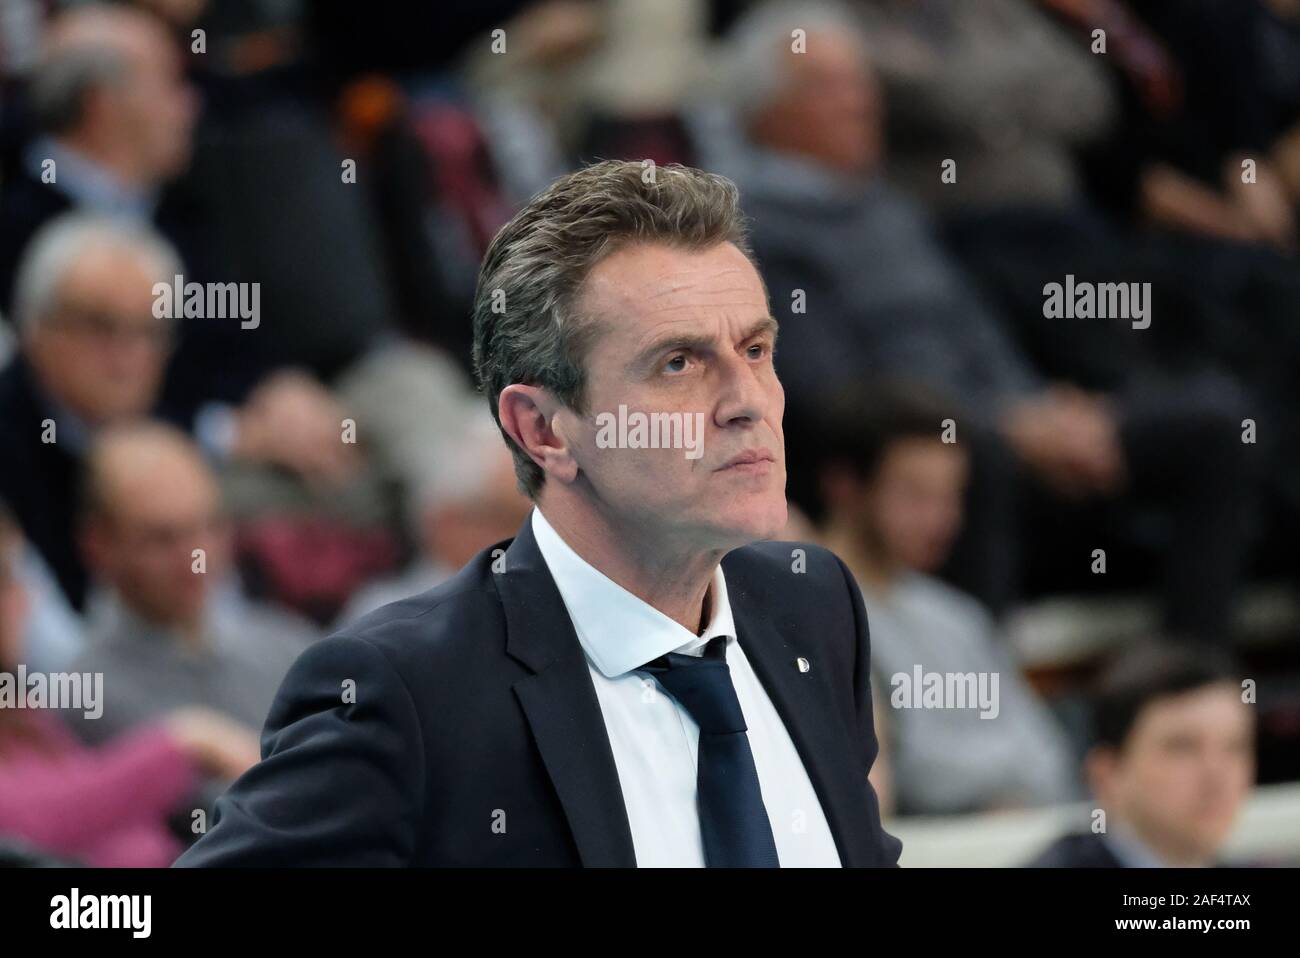 Trento, Italy. 12th Dec, 2019. angelo lorenzetti - coach itas trentino during Trentino Itas vs Fenerbahce HDI Sigorta Istambul, Volleybal Champions League Men Championship in Trento, Italy, December 12 2019 Credit: Independent Photo Agency/Alamy Live News Stock Photo